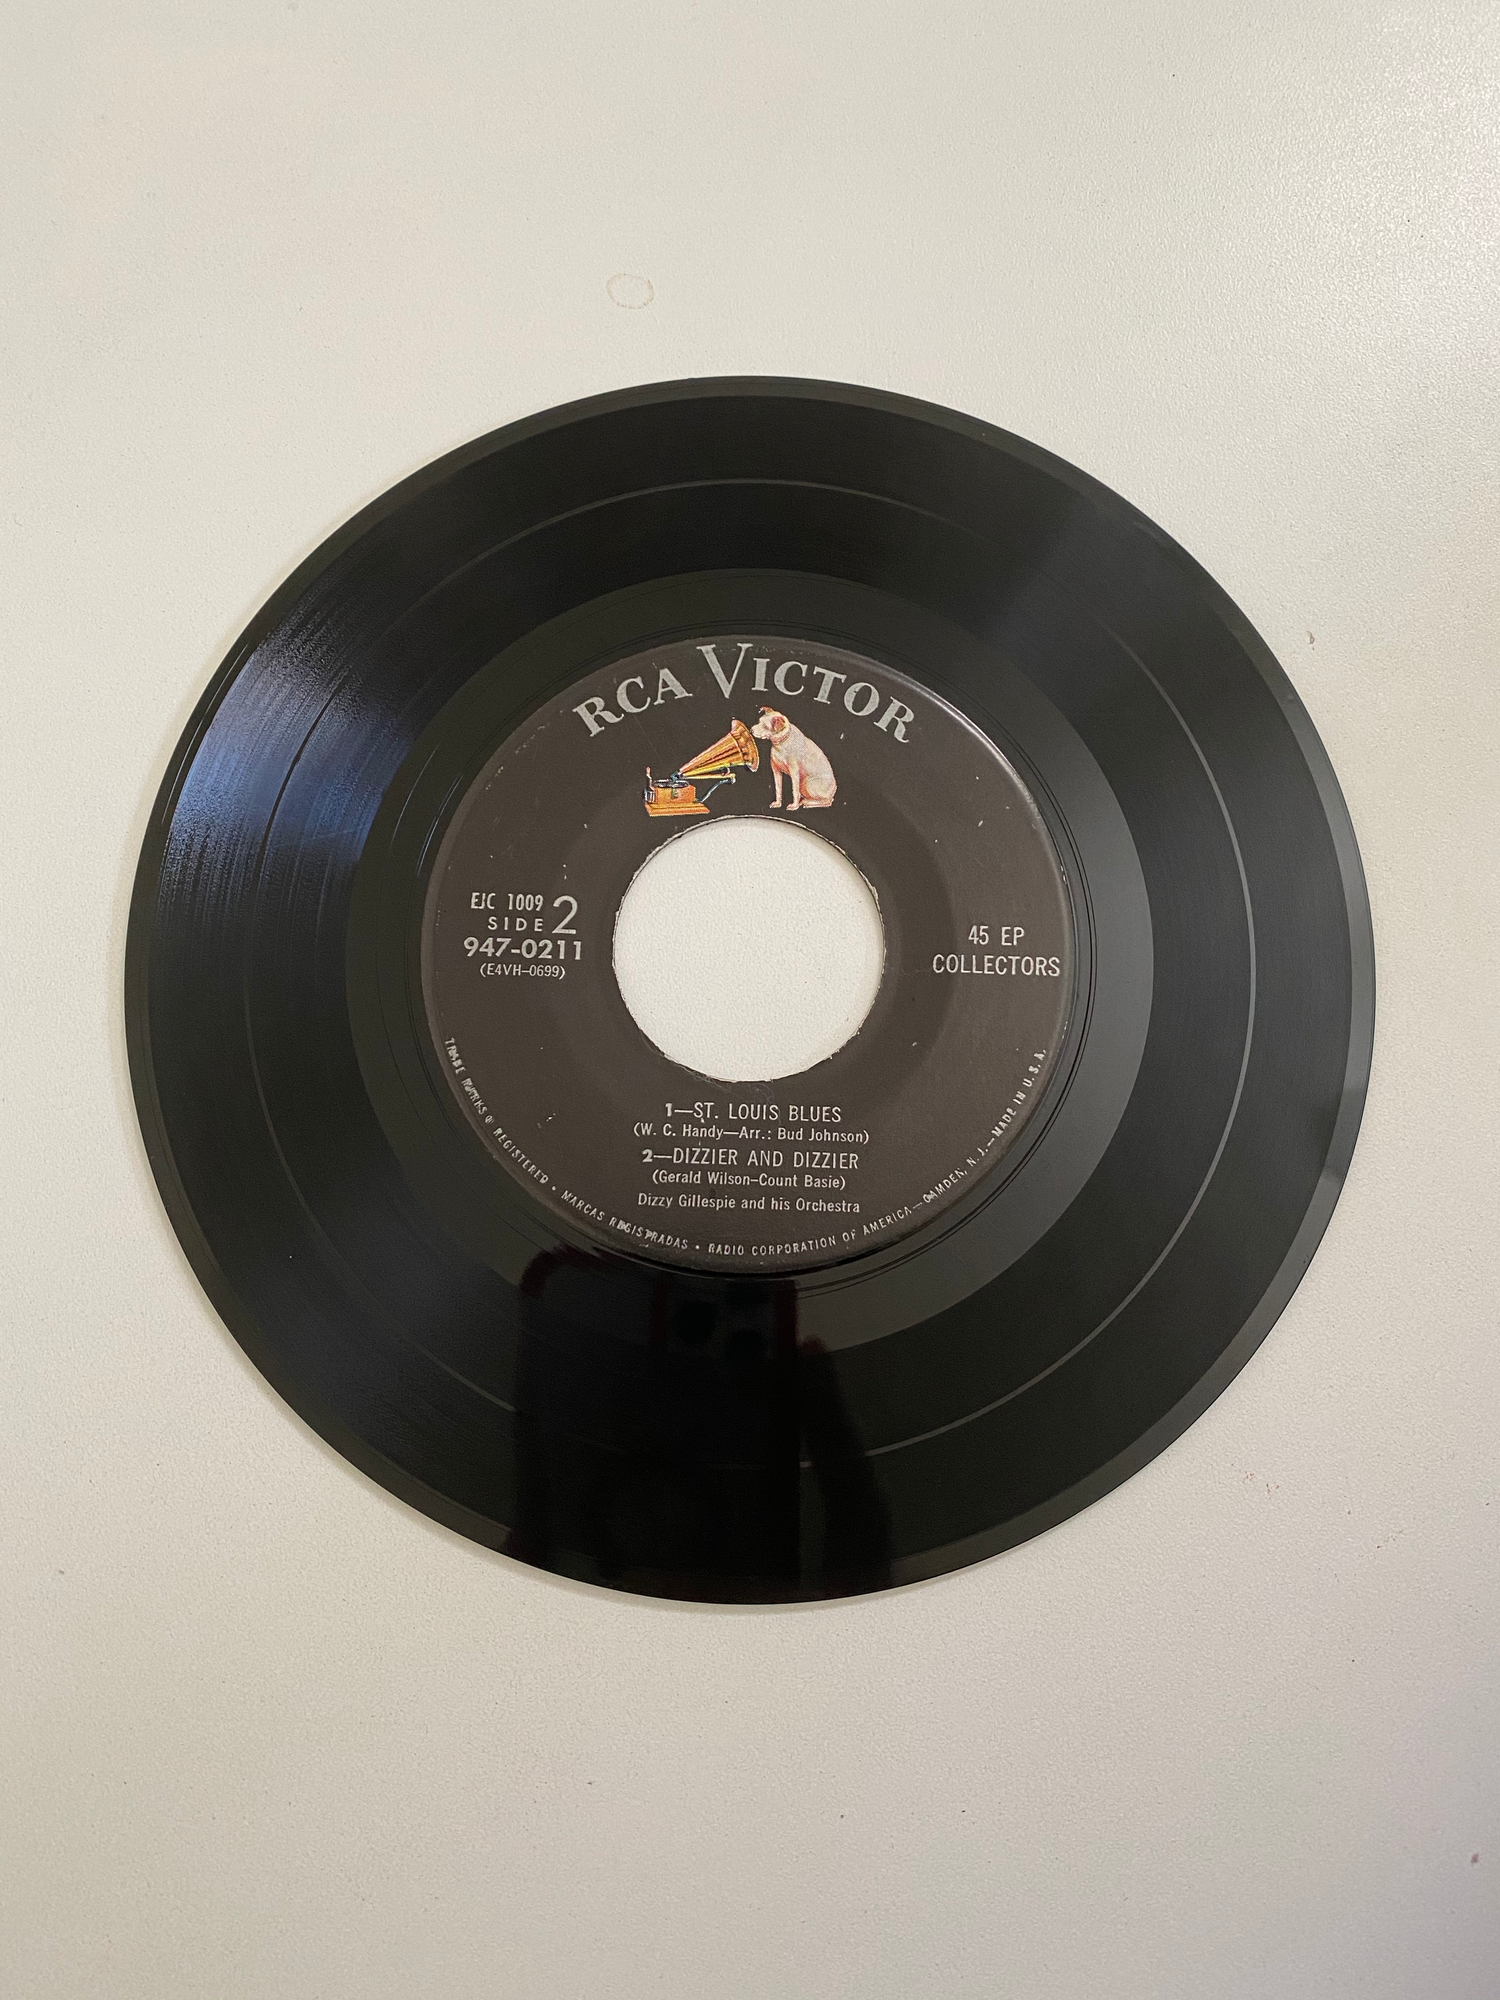 Dizzy Gillespie and his Orchestra - St. Louis Blues | 45 The Vintedge Co.